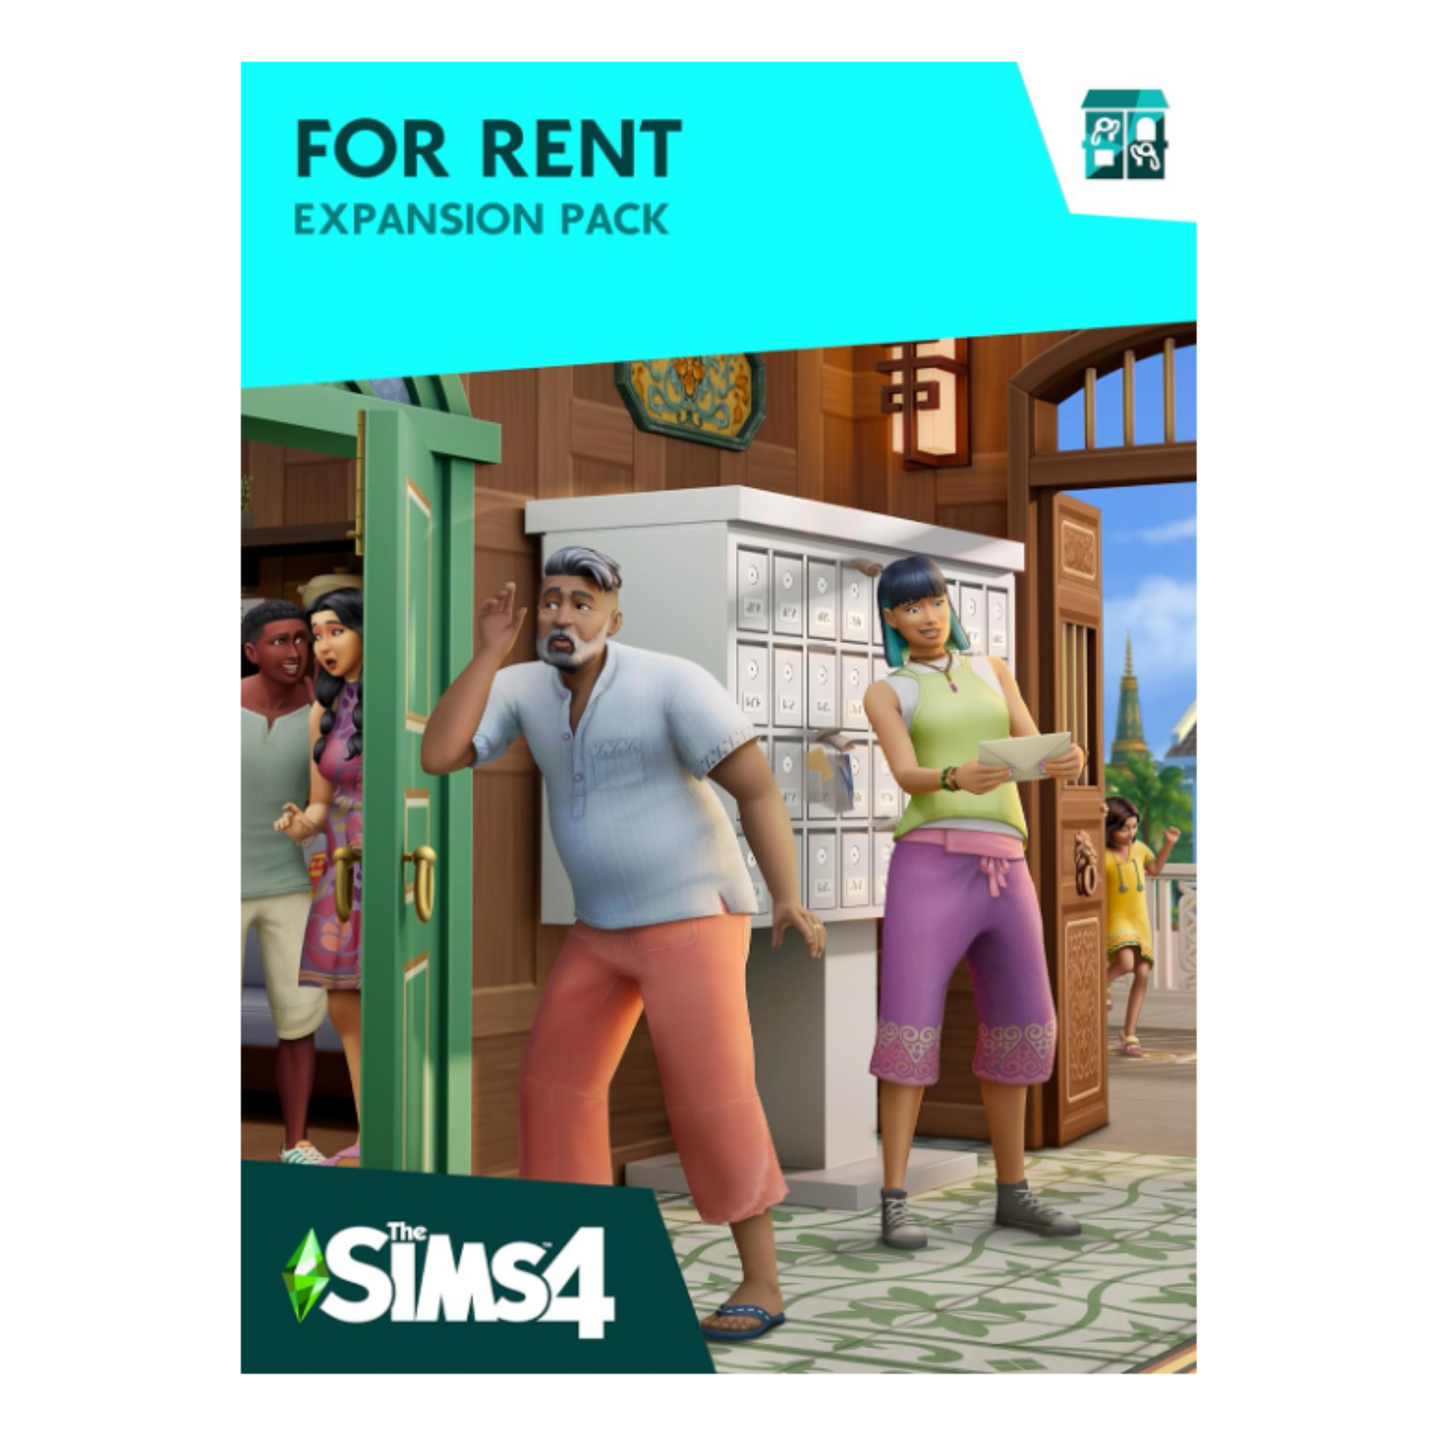 The sims 4 for Rent Expansion Pack for PC/MAC